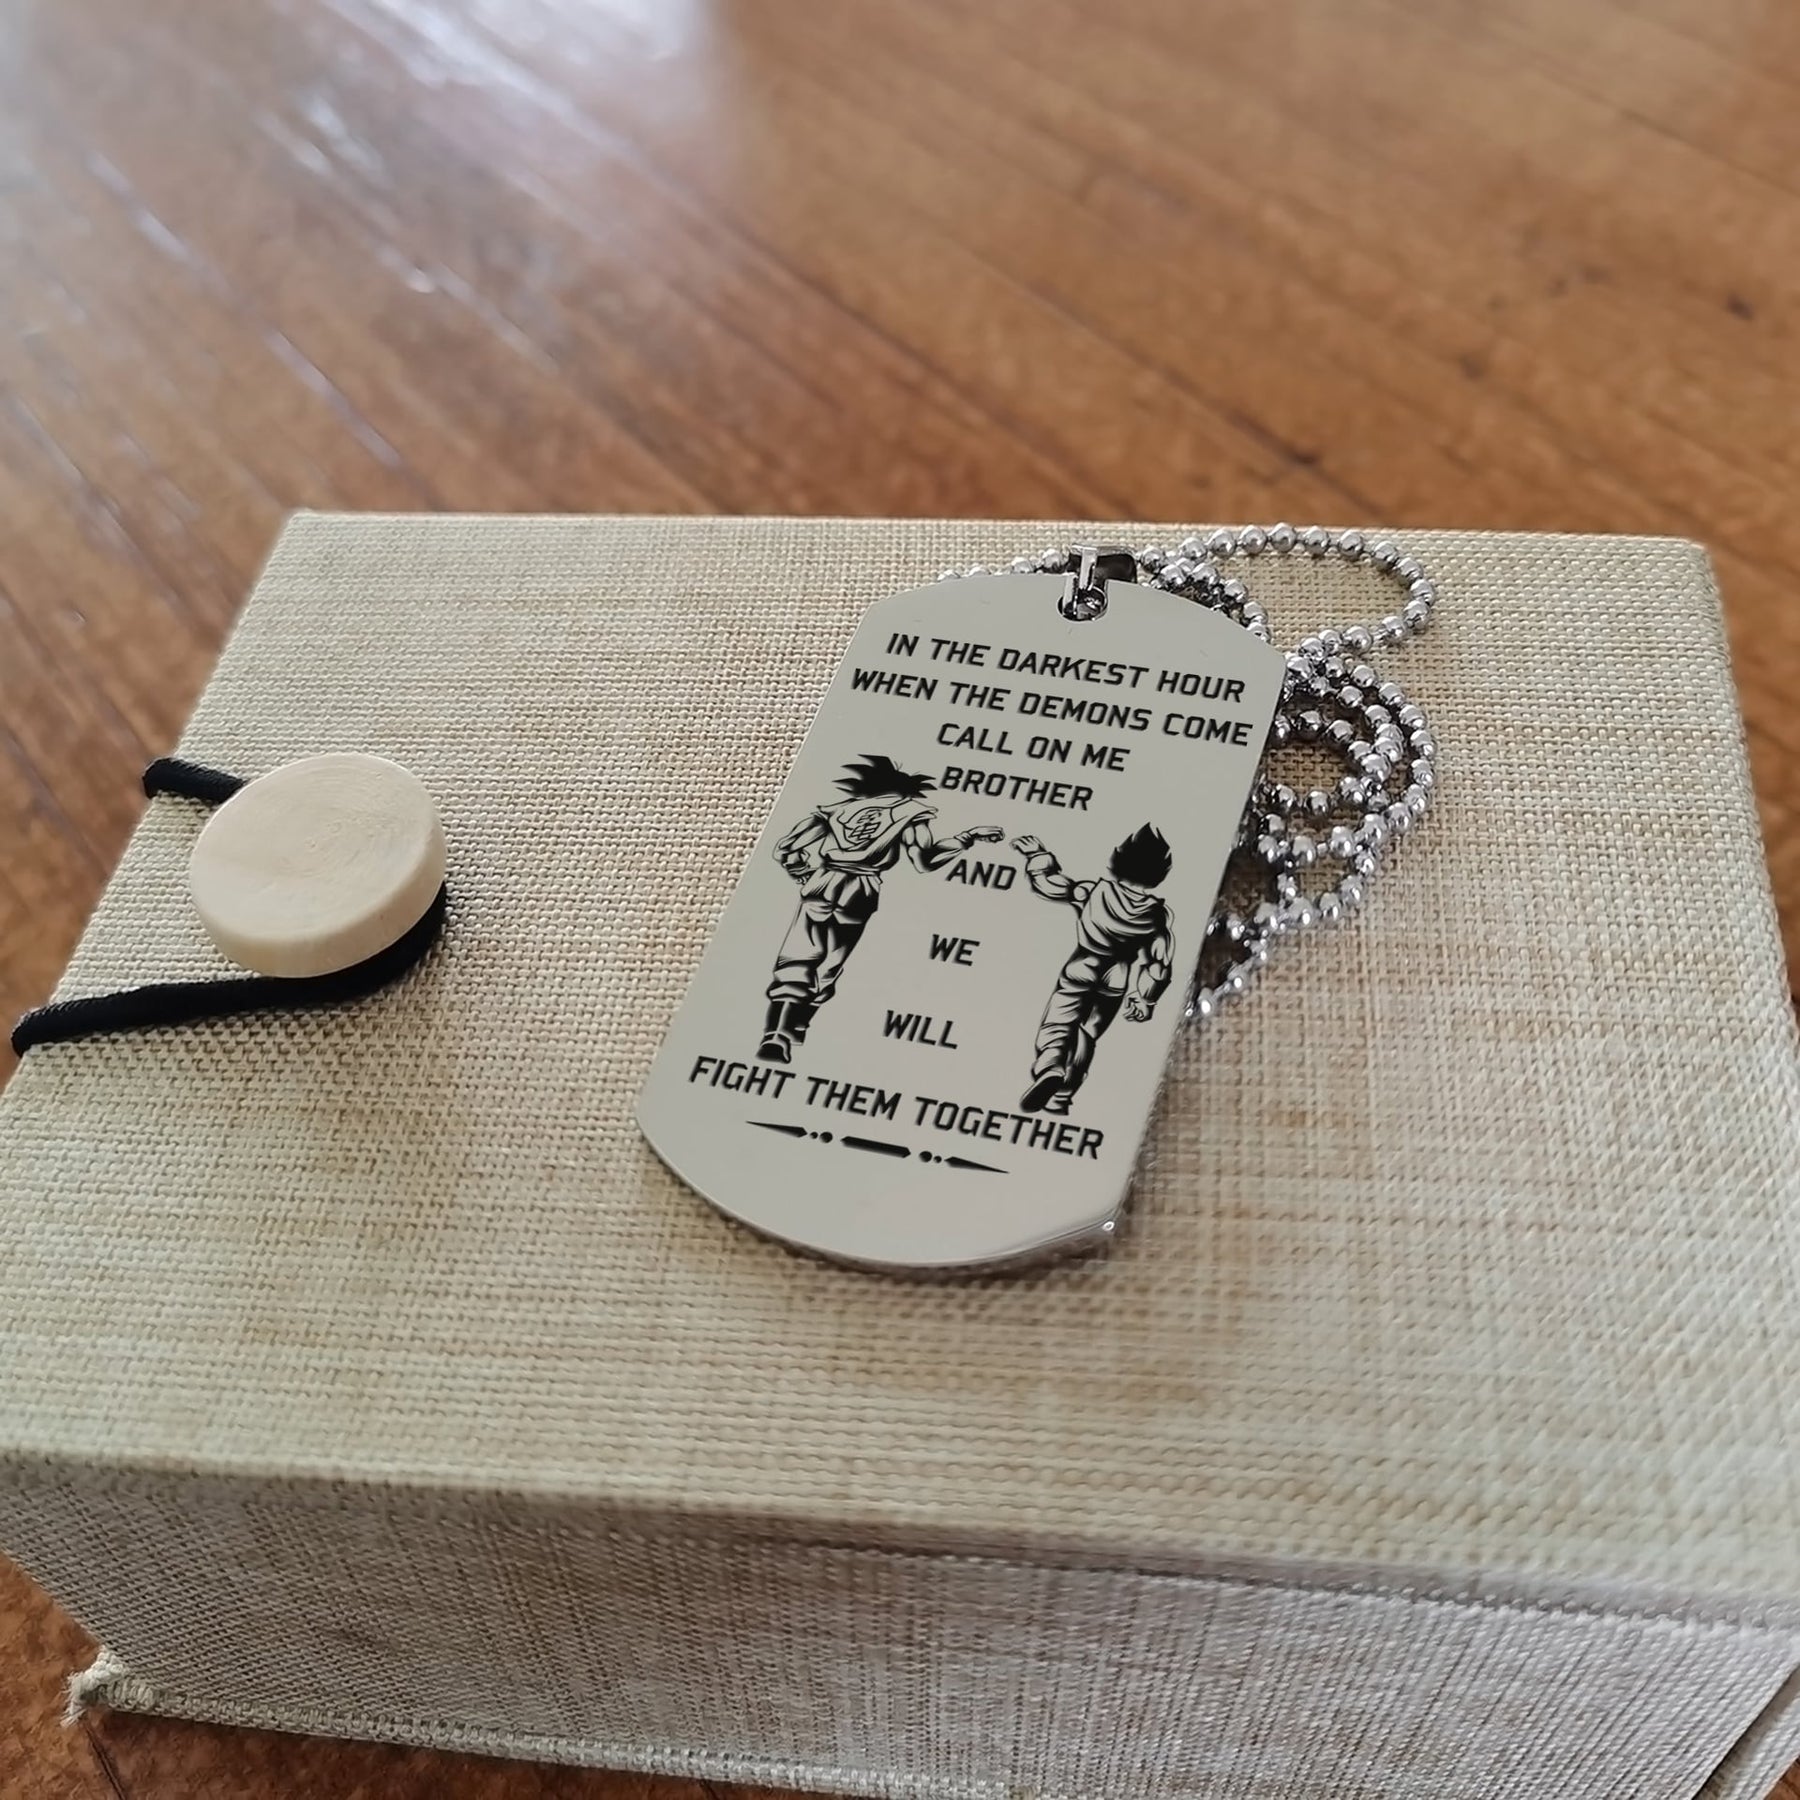 DRD036 - Call On Me Brother - It's About Being Better Than You Were The Day Before - Goku - Vegeta - Dragon Ball Dog Tag - Double Side Engrave Silver Dog Tag